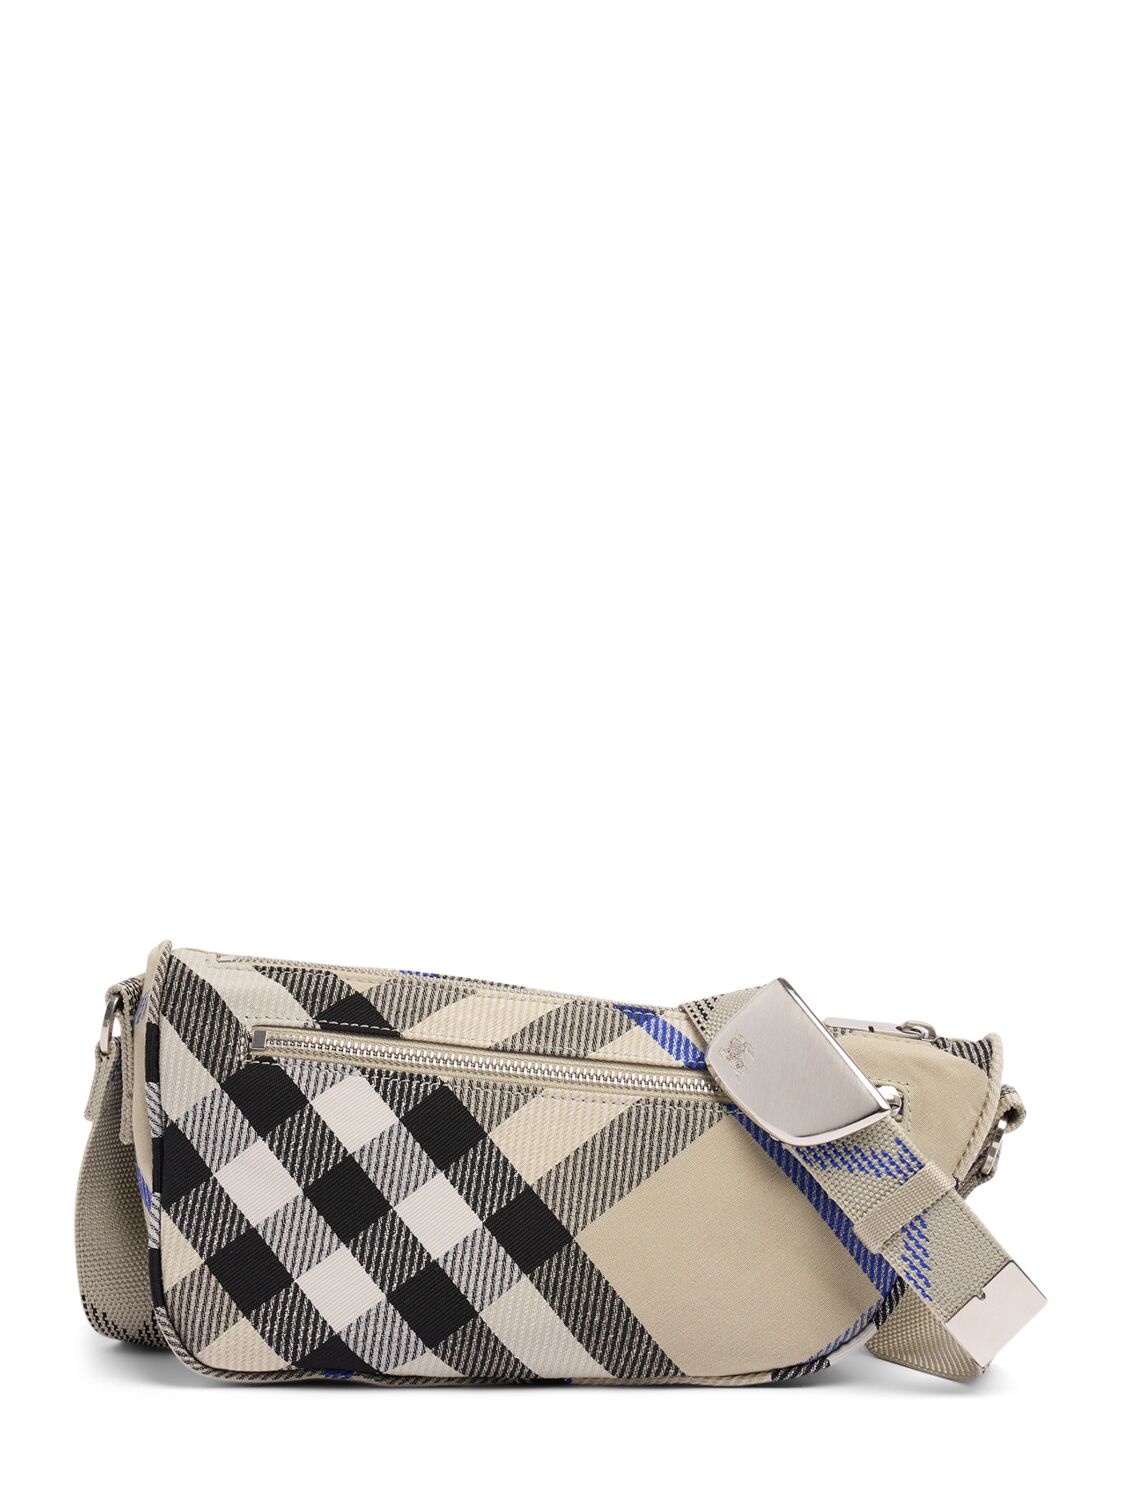 Burberry Small Maderia Check Shield Messenger Bag In Black